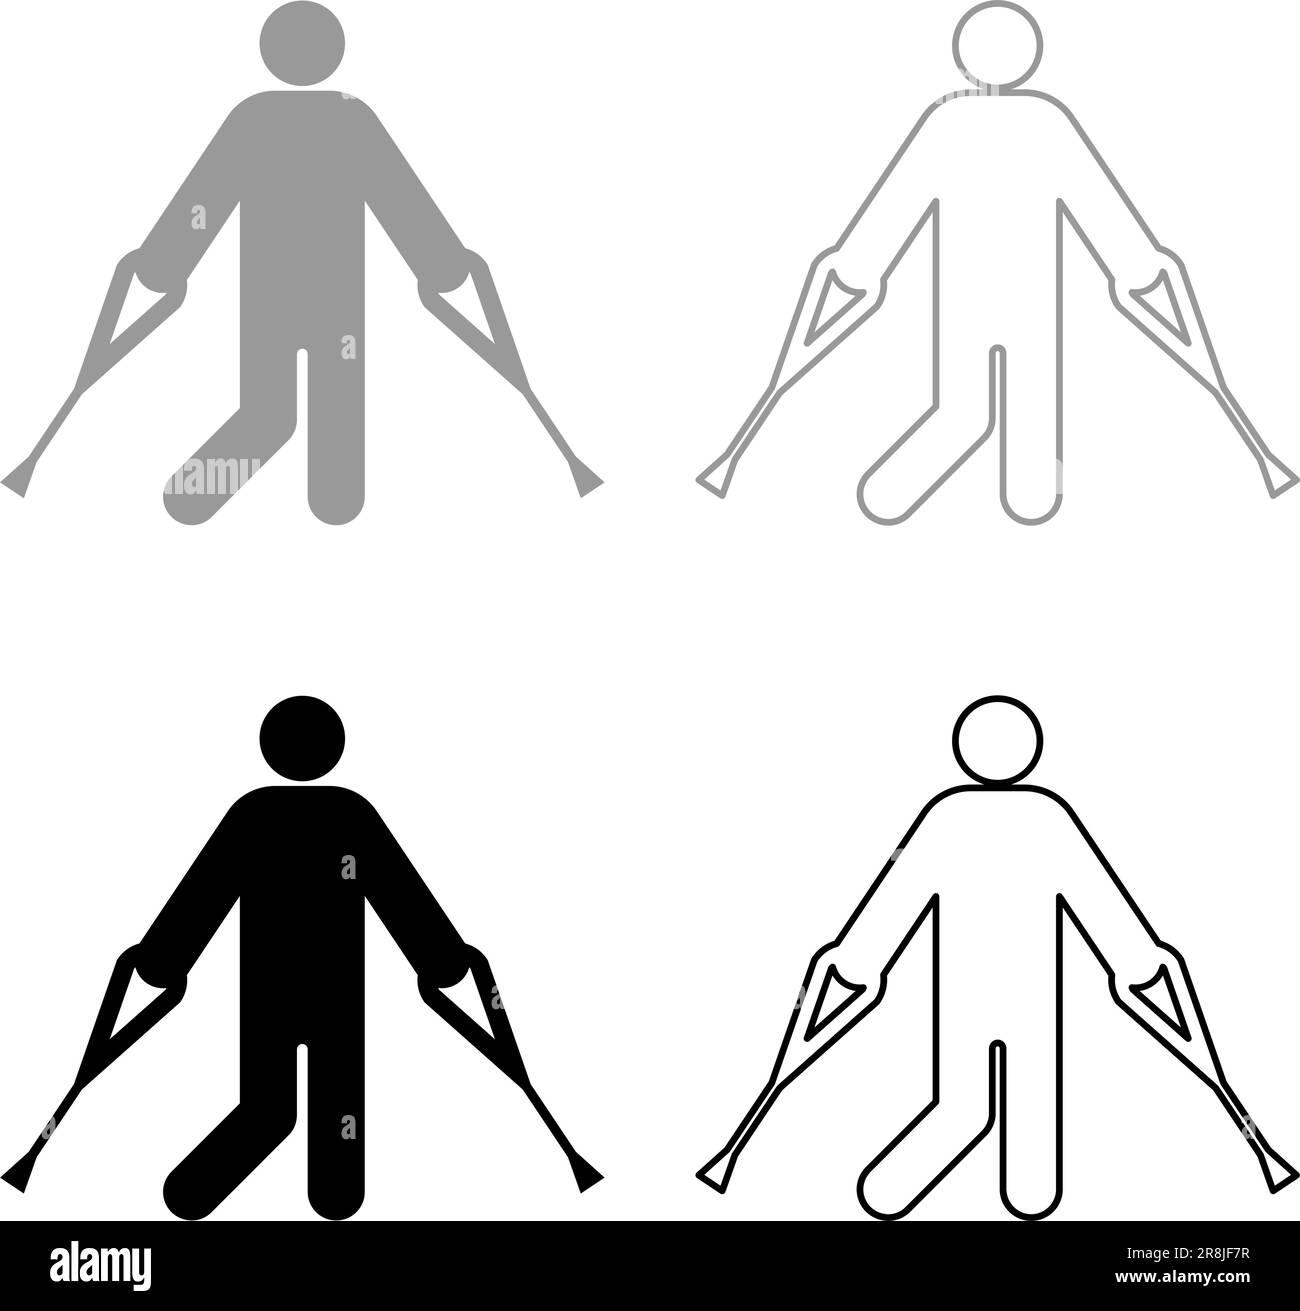 Man with crutchs crutches broken leg in cast gypsum bone injury fracture set icon grey black color vector illustration image simple solid fill Stock Vector